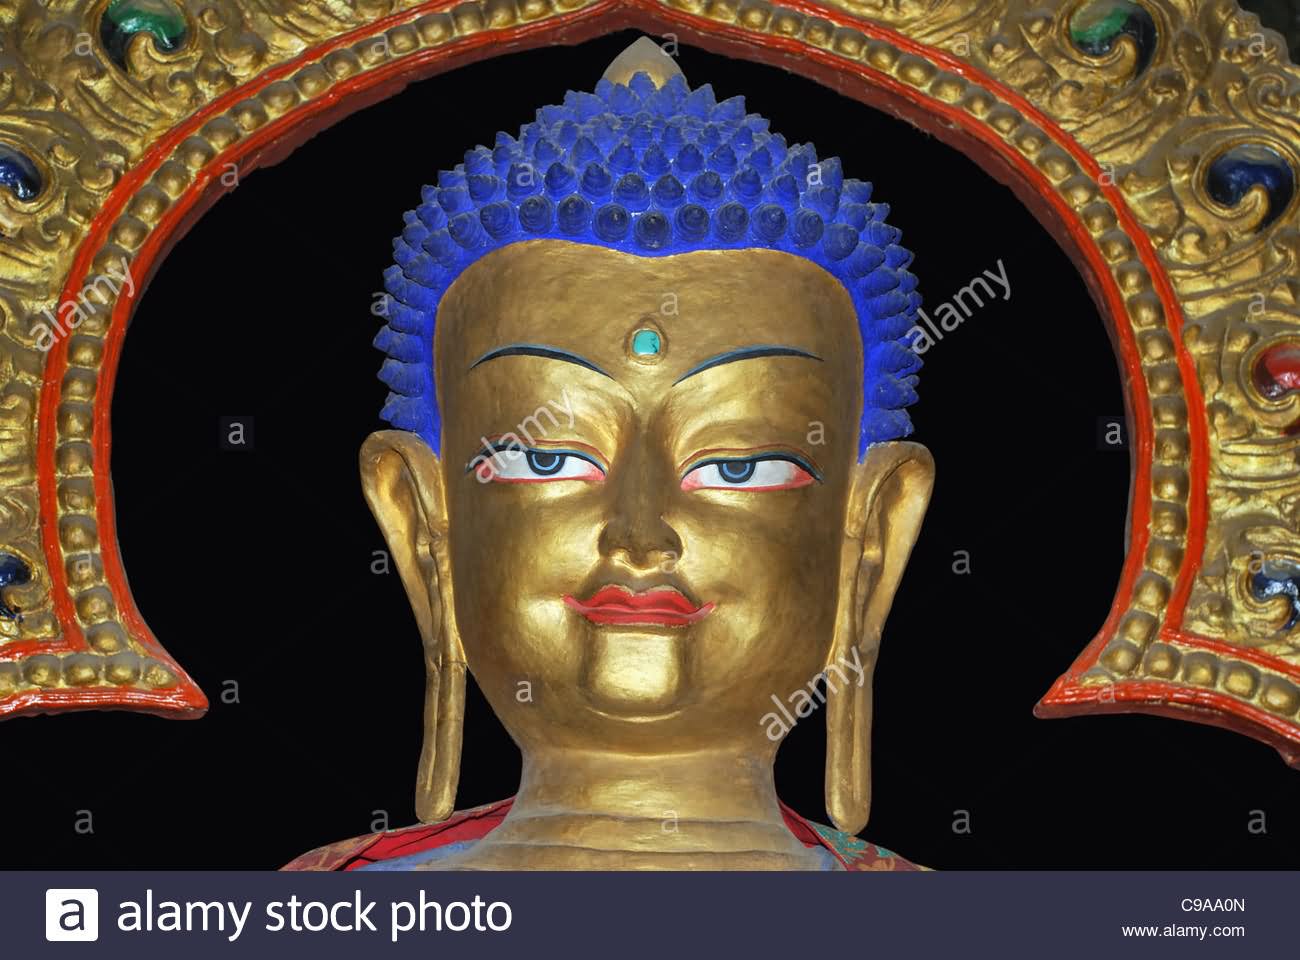 Lord Buddha Golden Statue Inside The  Leh Palace